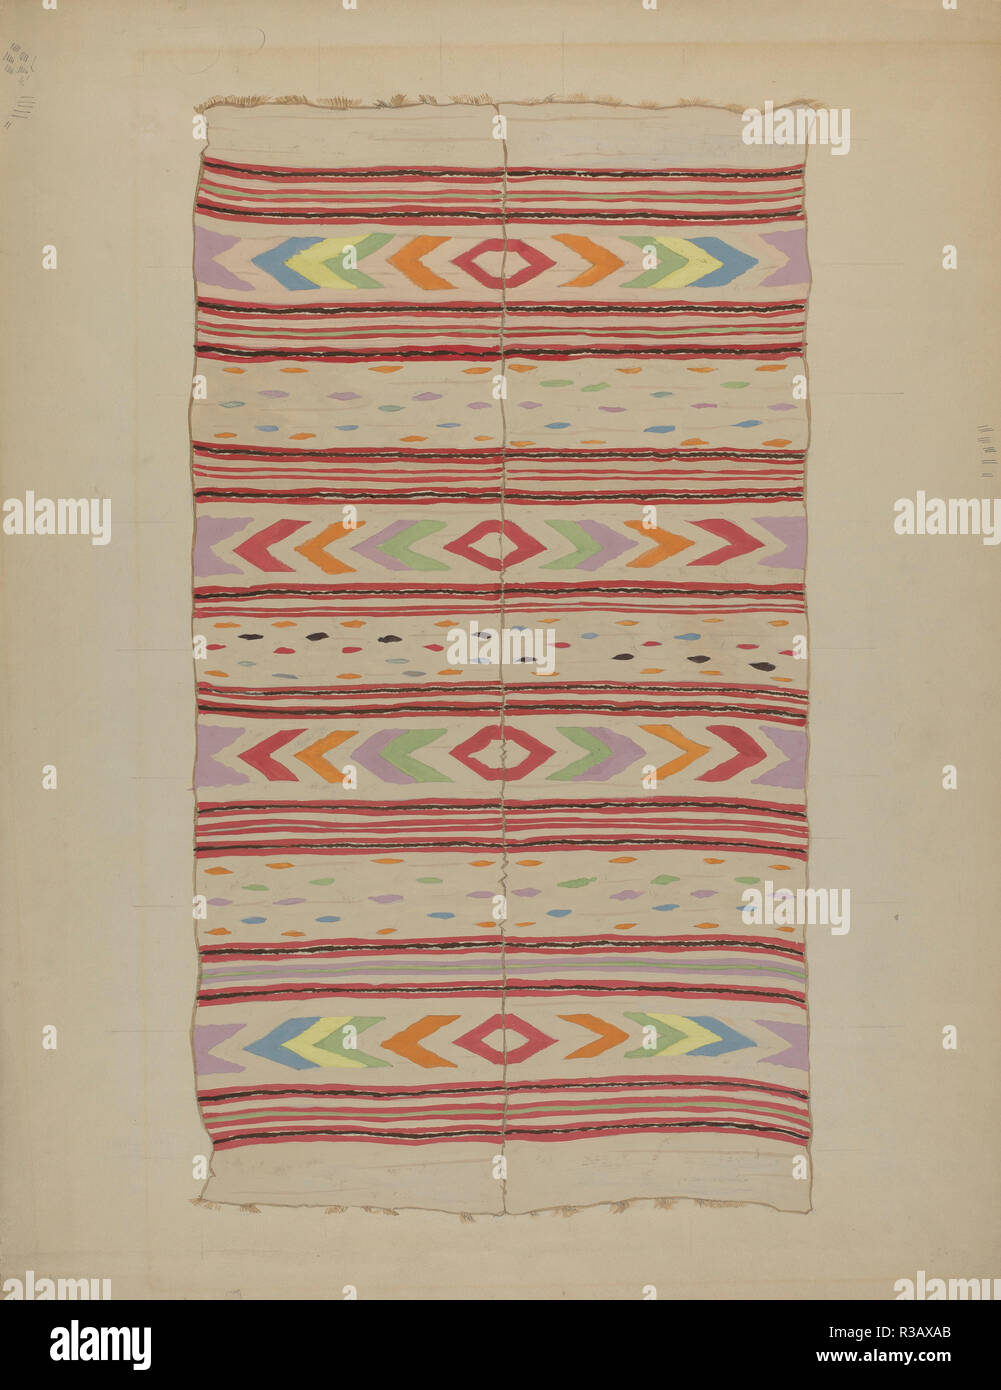 Colcha. Dated: 1935/1942. Dimensions: overall: 66.1 x 51 cm (26 x 20 1/16 in.)  Original IAD Object: 76' long; 46' wide. Medium: watercolor, graphite, and gouache on paper. Museum: National Gallery of Art, Washington DC. Author: American 20th Century. Stock Photo